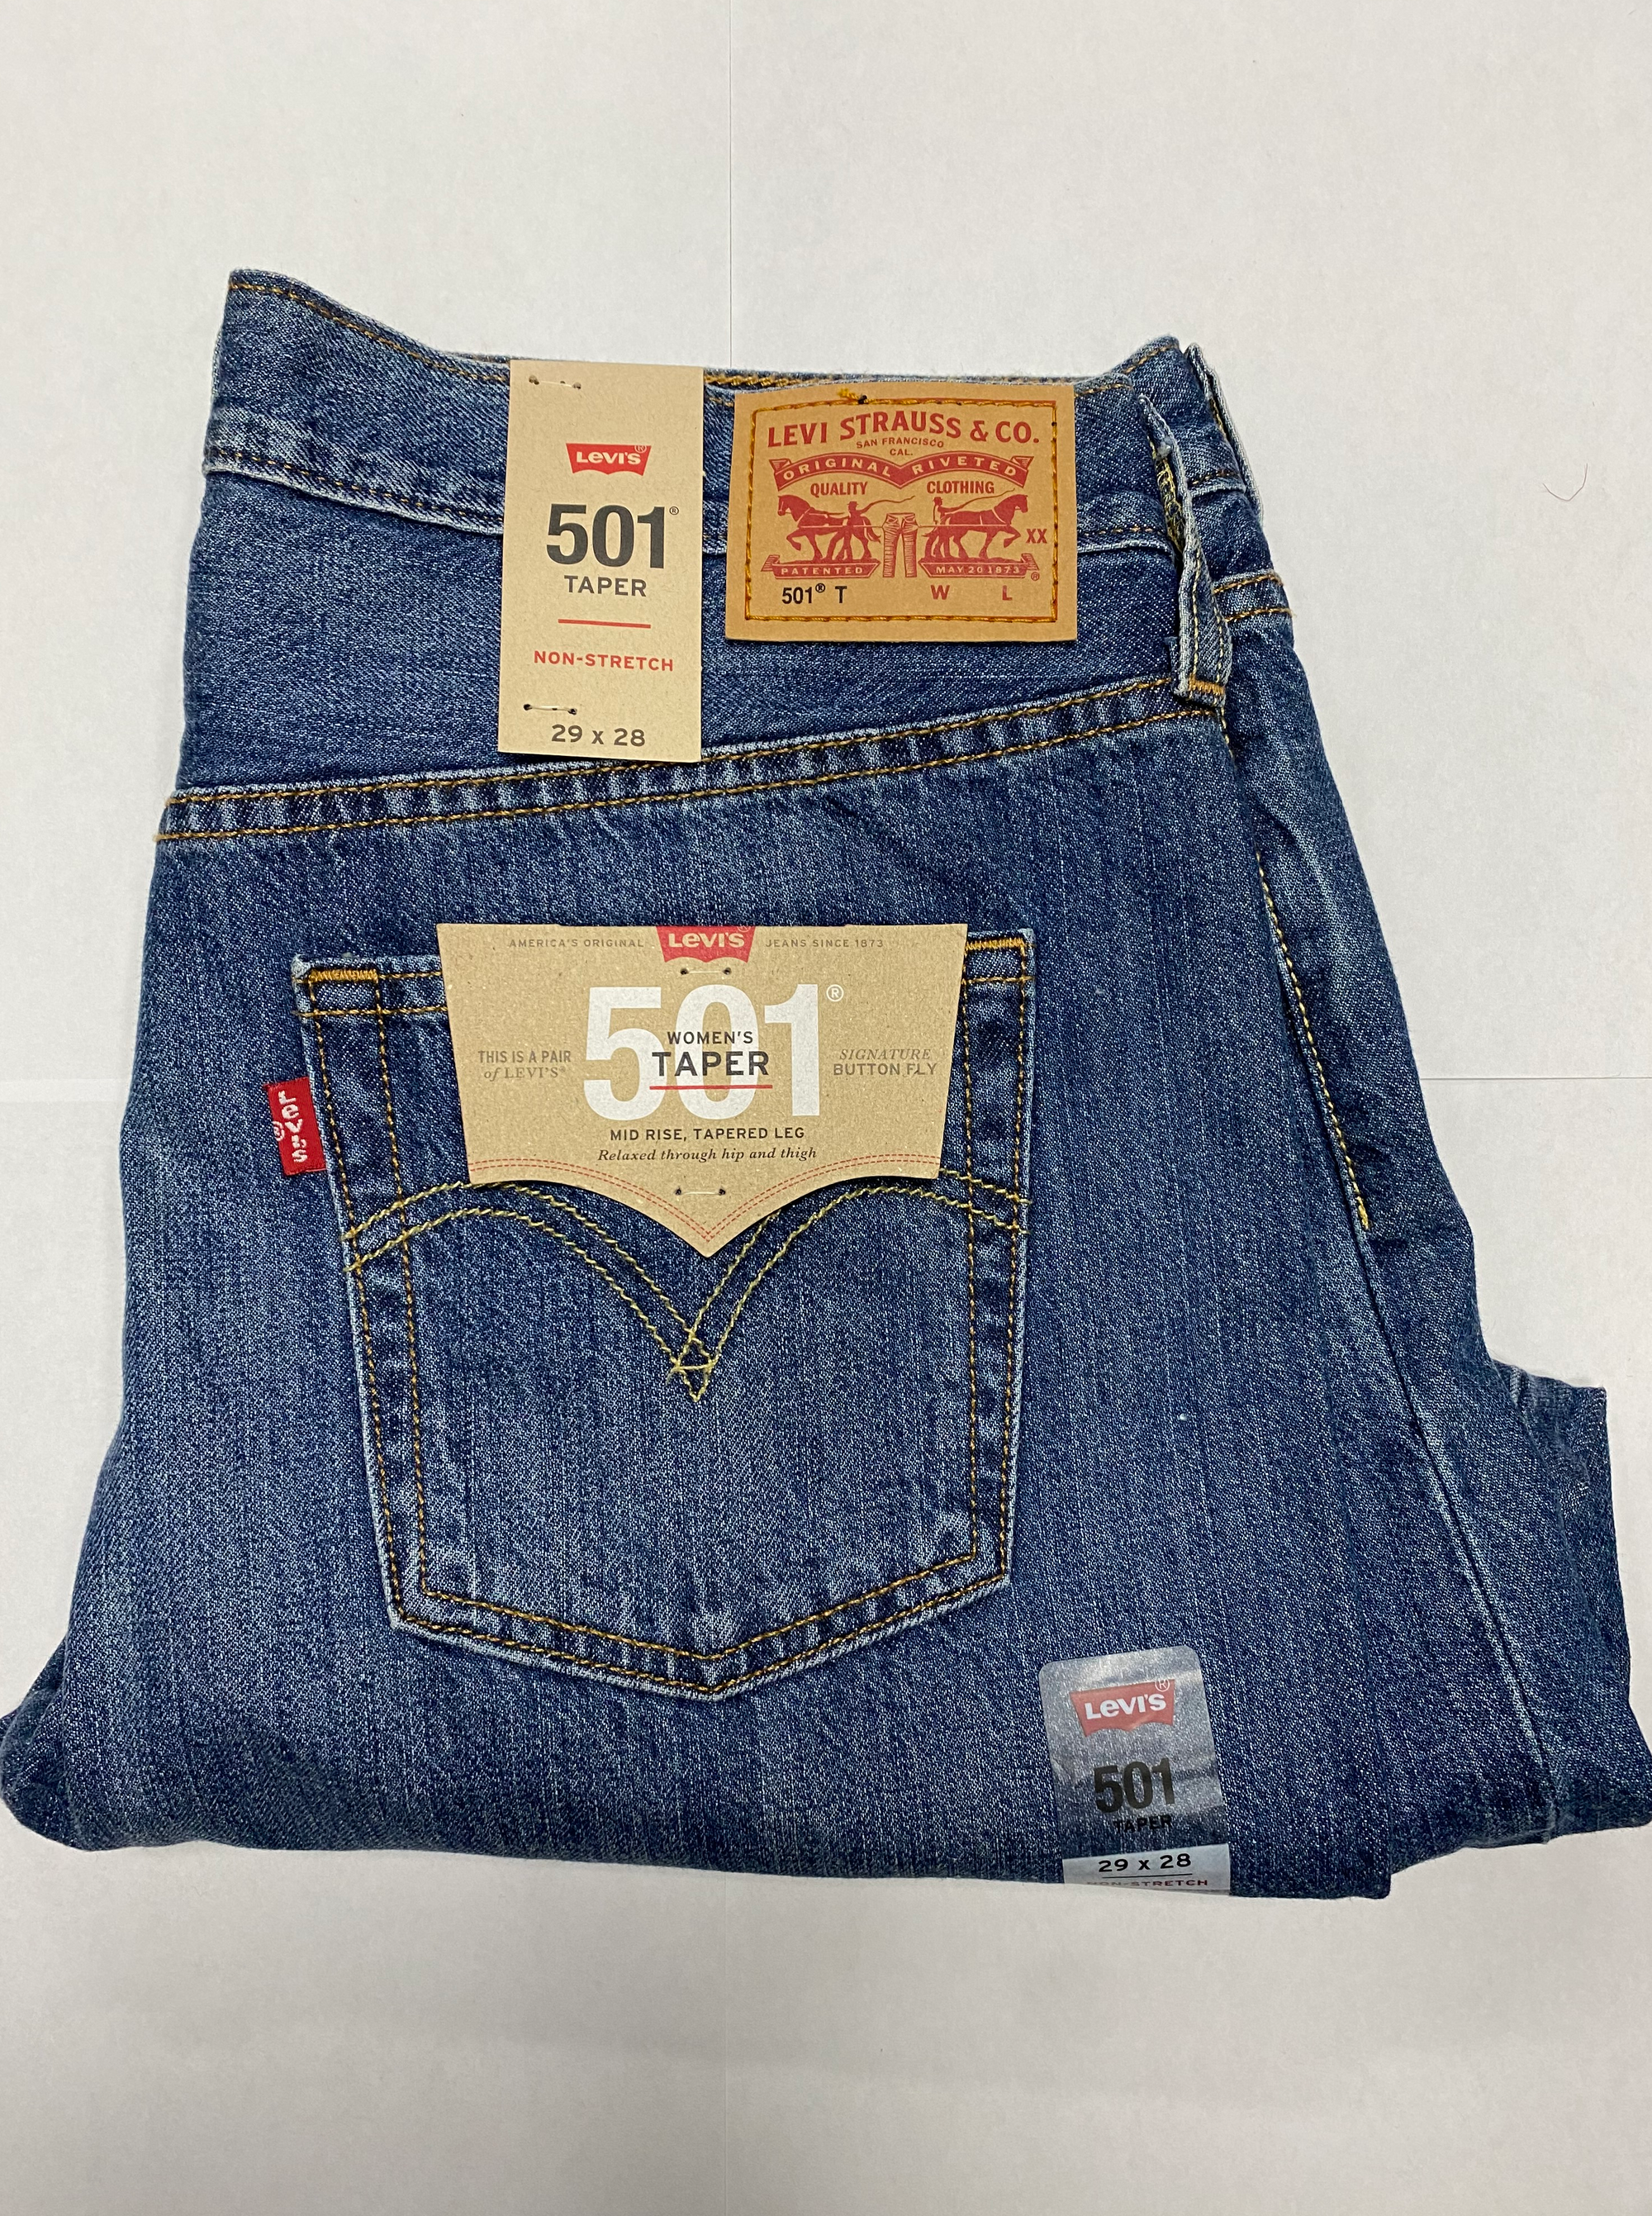 LEVIS 501® MID RISE TAPERED JEAN - The Blue Ox 916